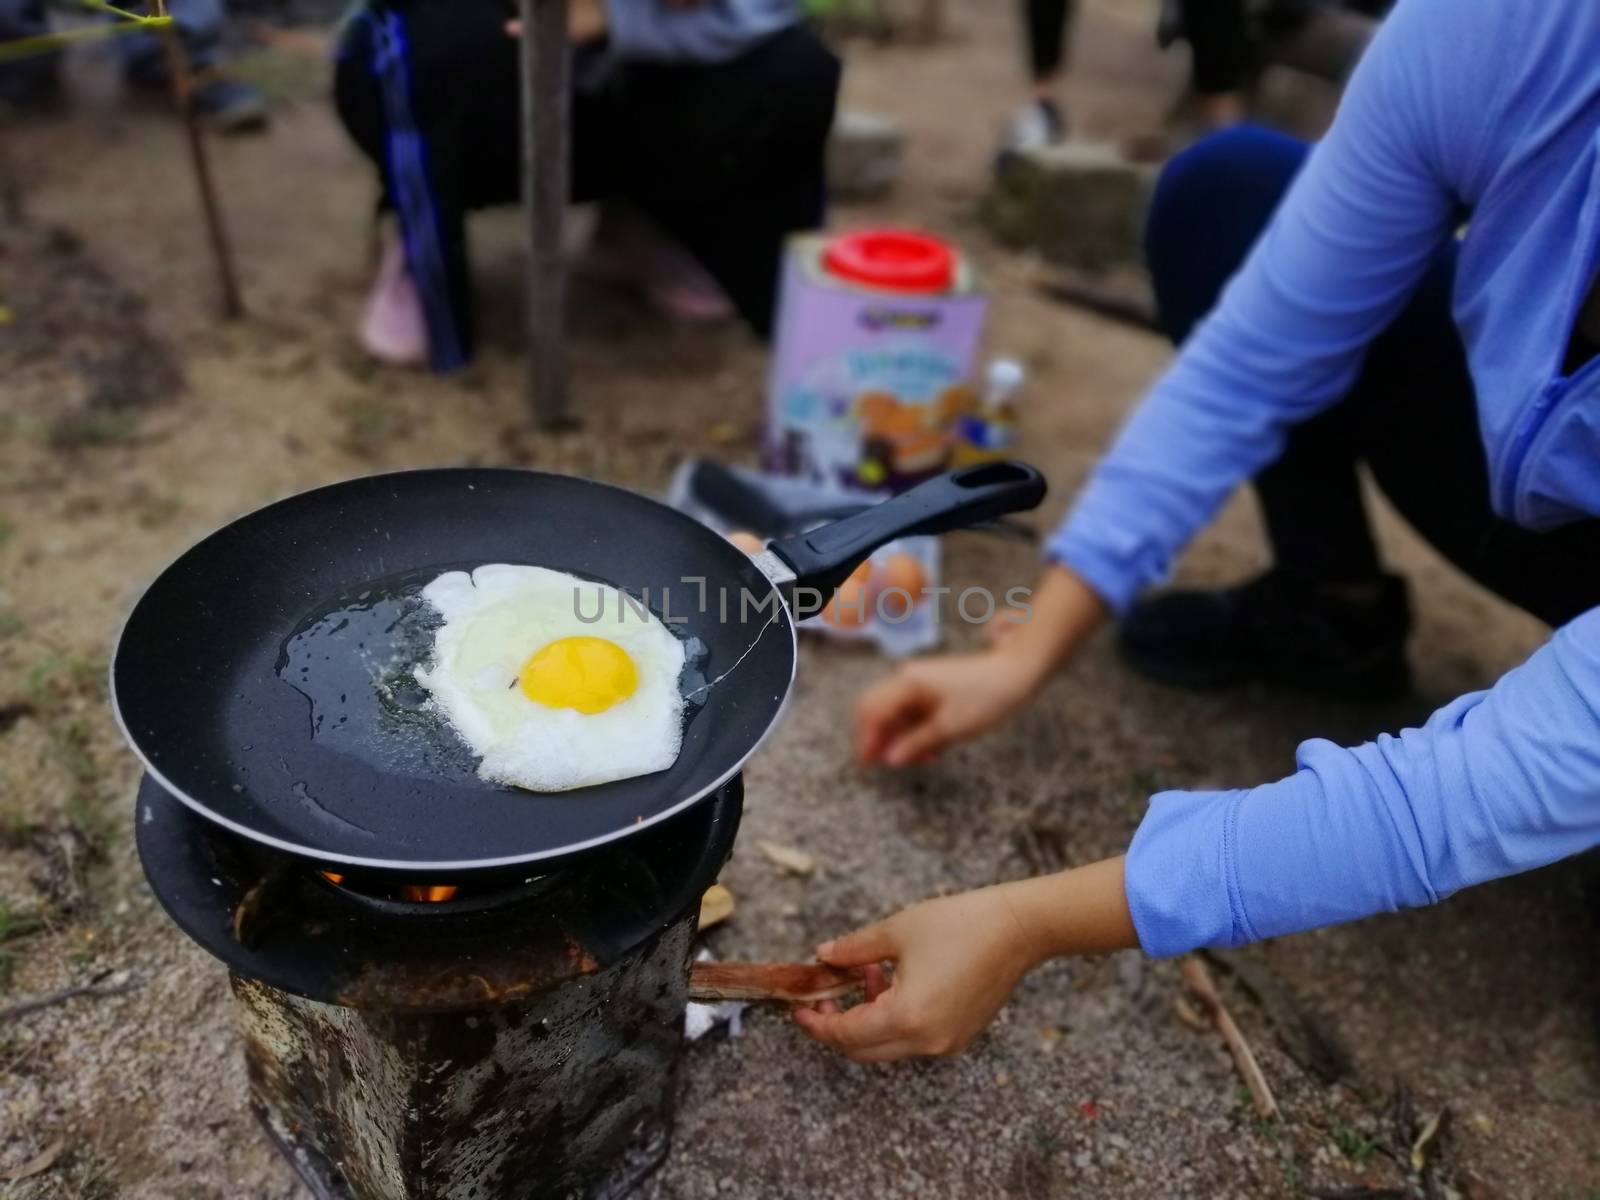 Cooking breakfast on campfire in cast iron pan with selective focus.